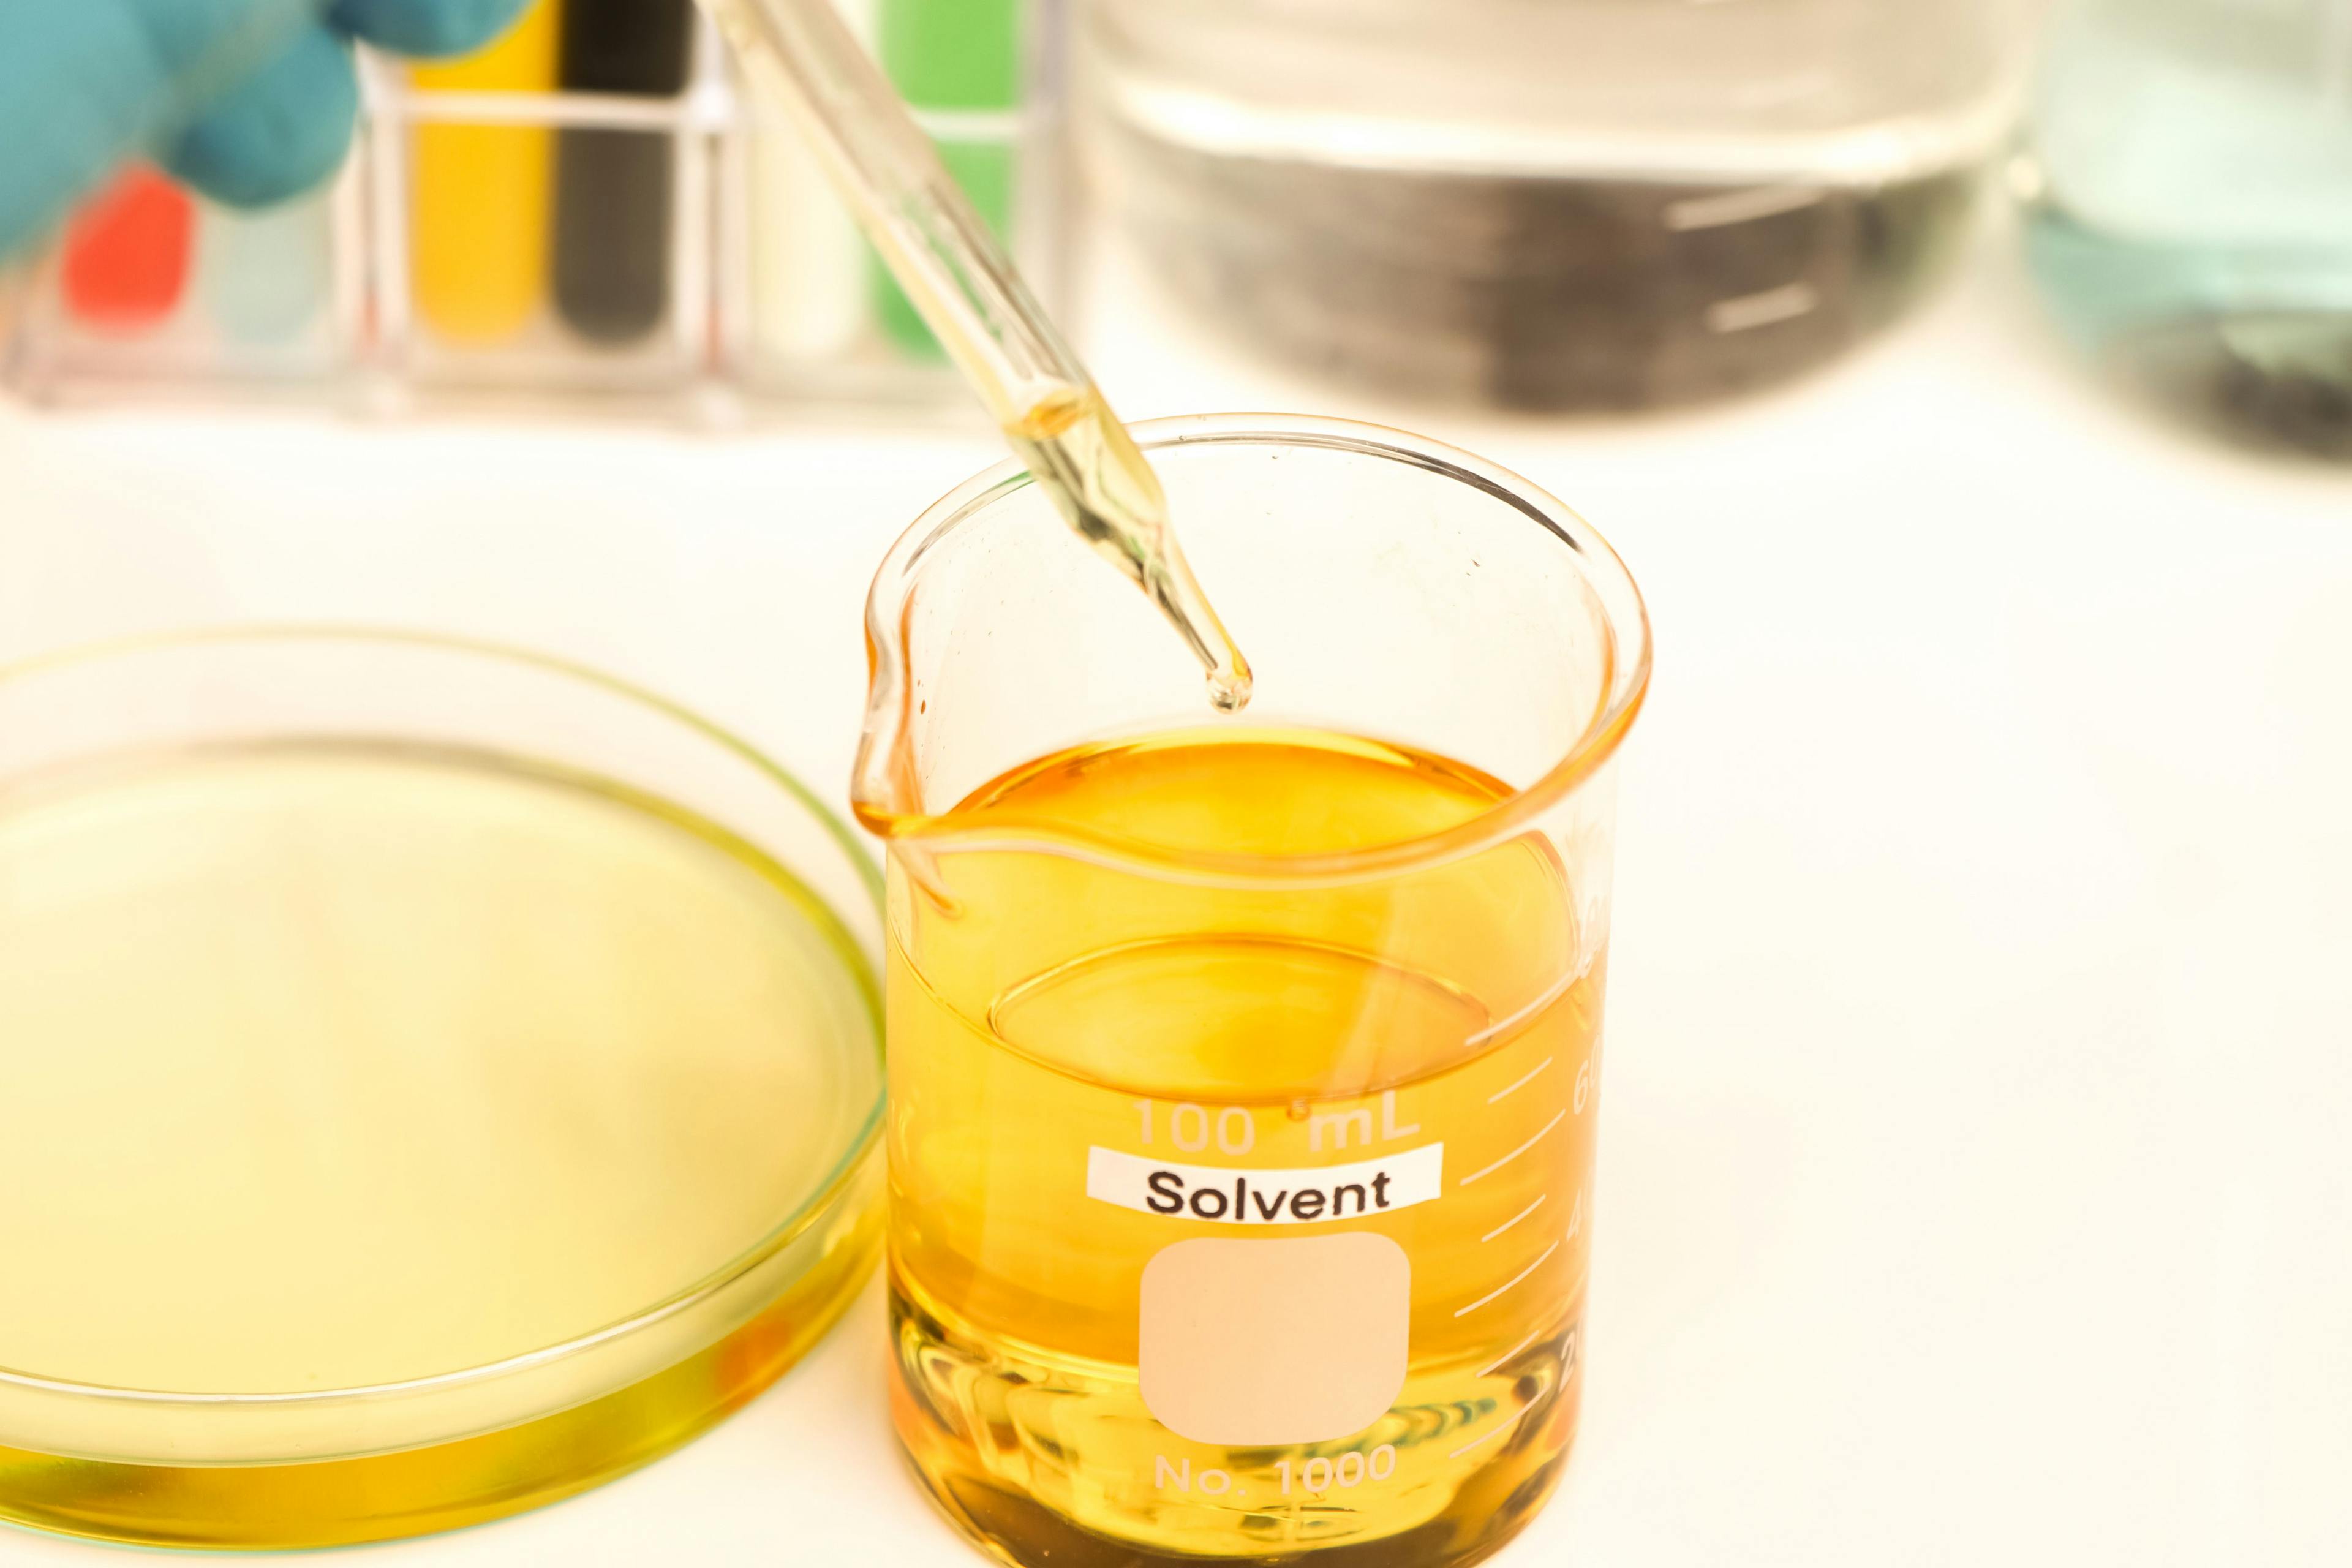 solvent , a chemical used in laboratory or industry | Image Credit: © kittisak - stock.adobe.com